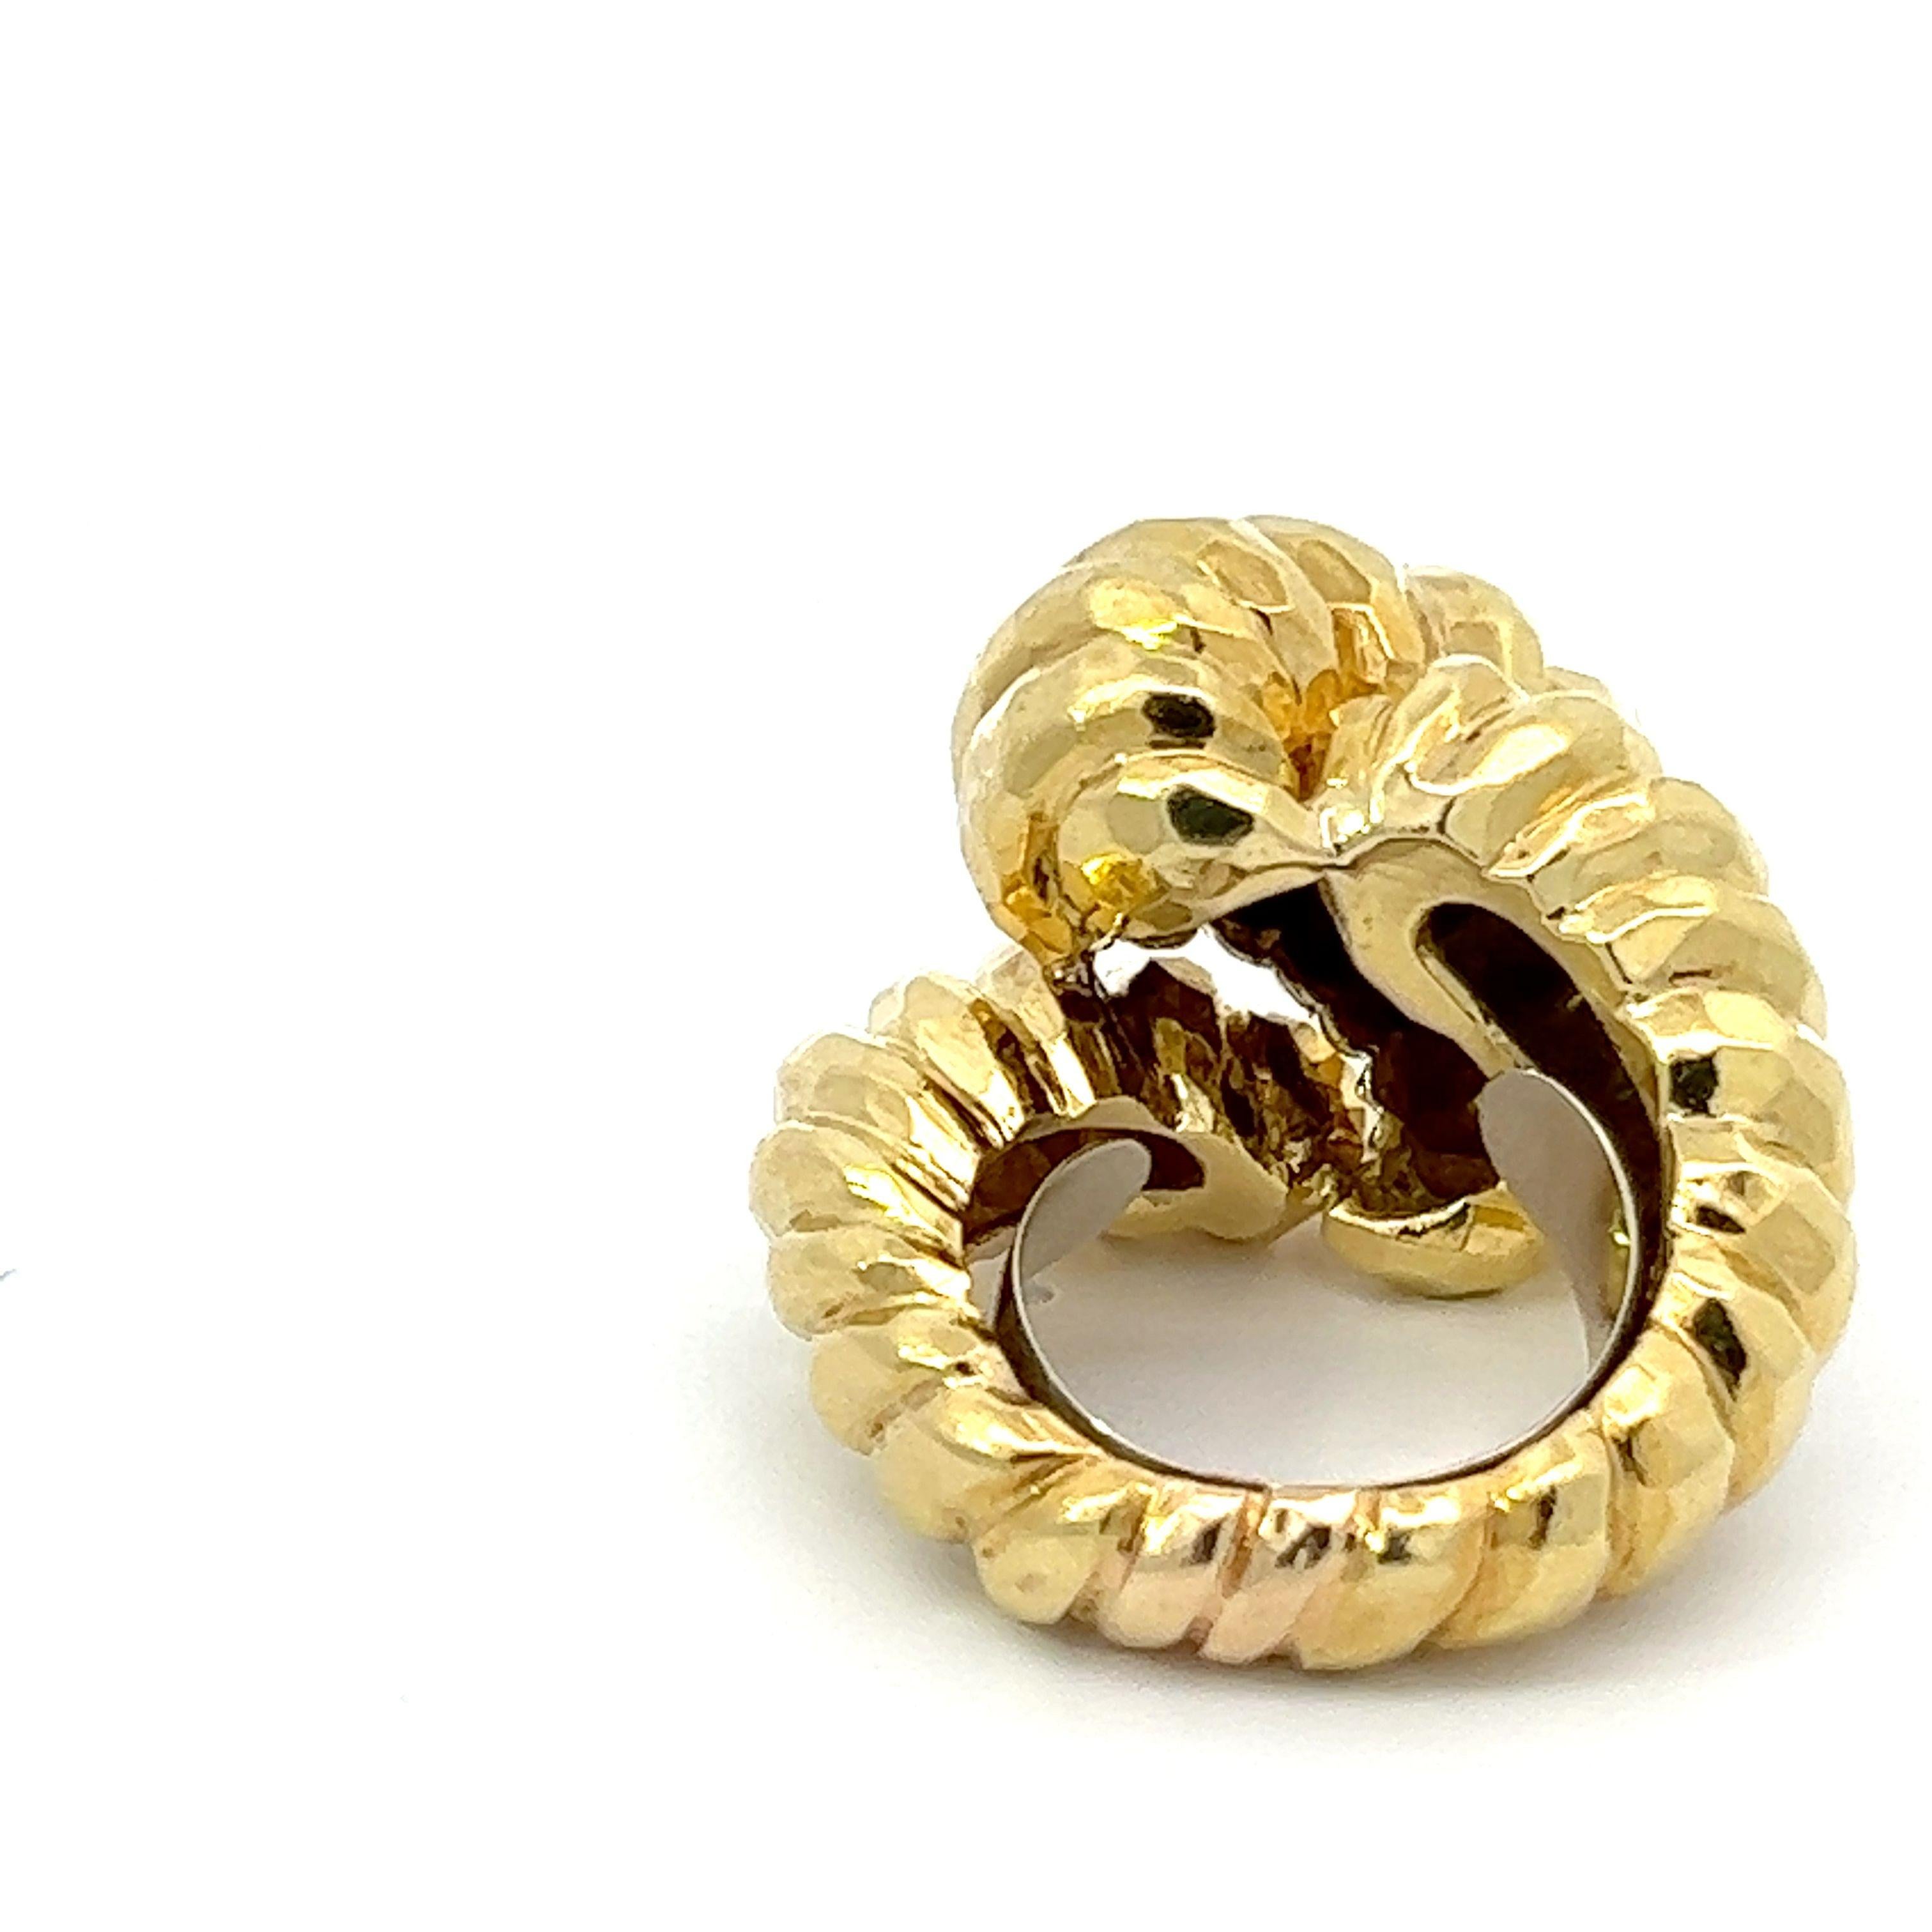 Henry Dunay 18k Gold Hammered Finish Croissant Large Statement Cocktail Ring 2